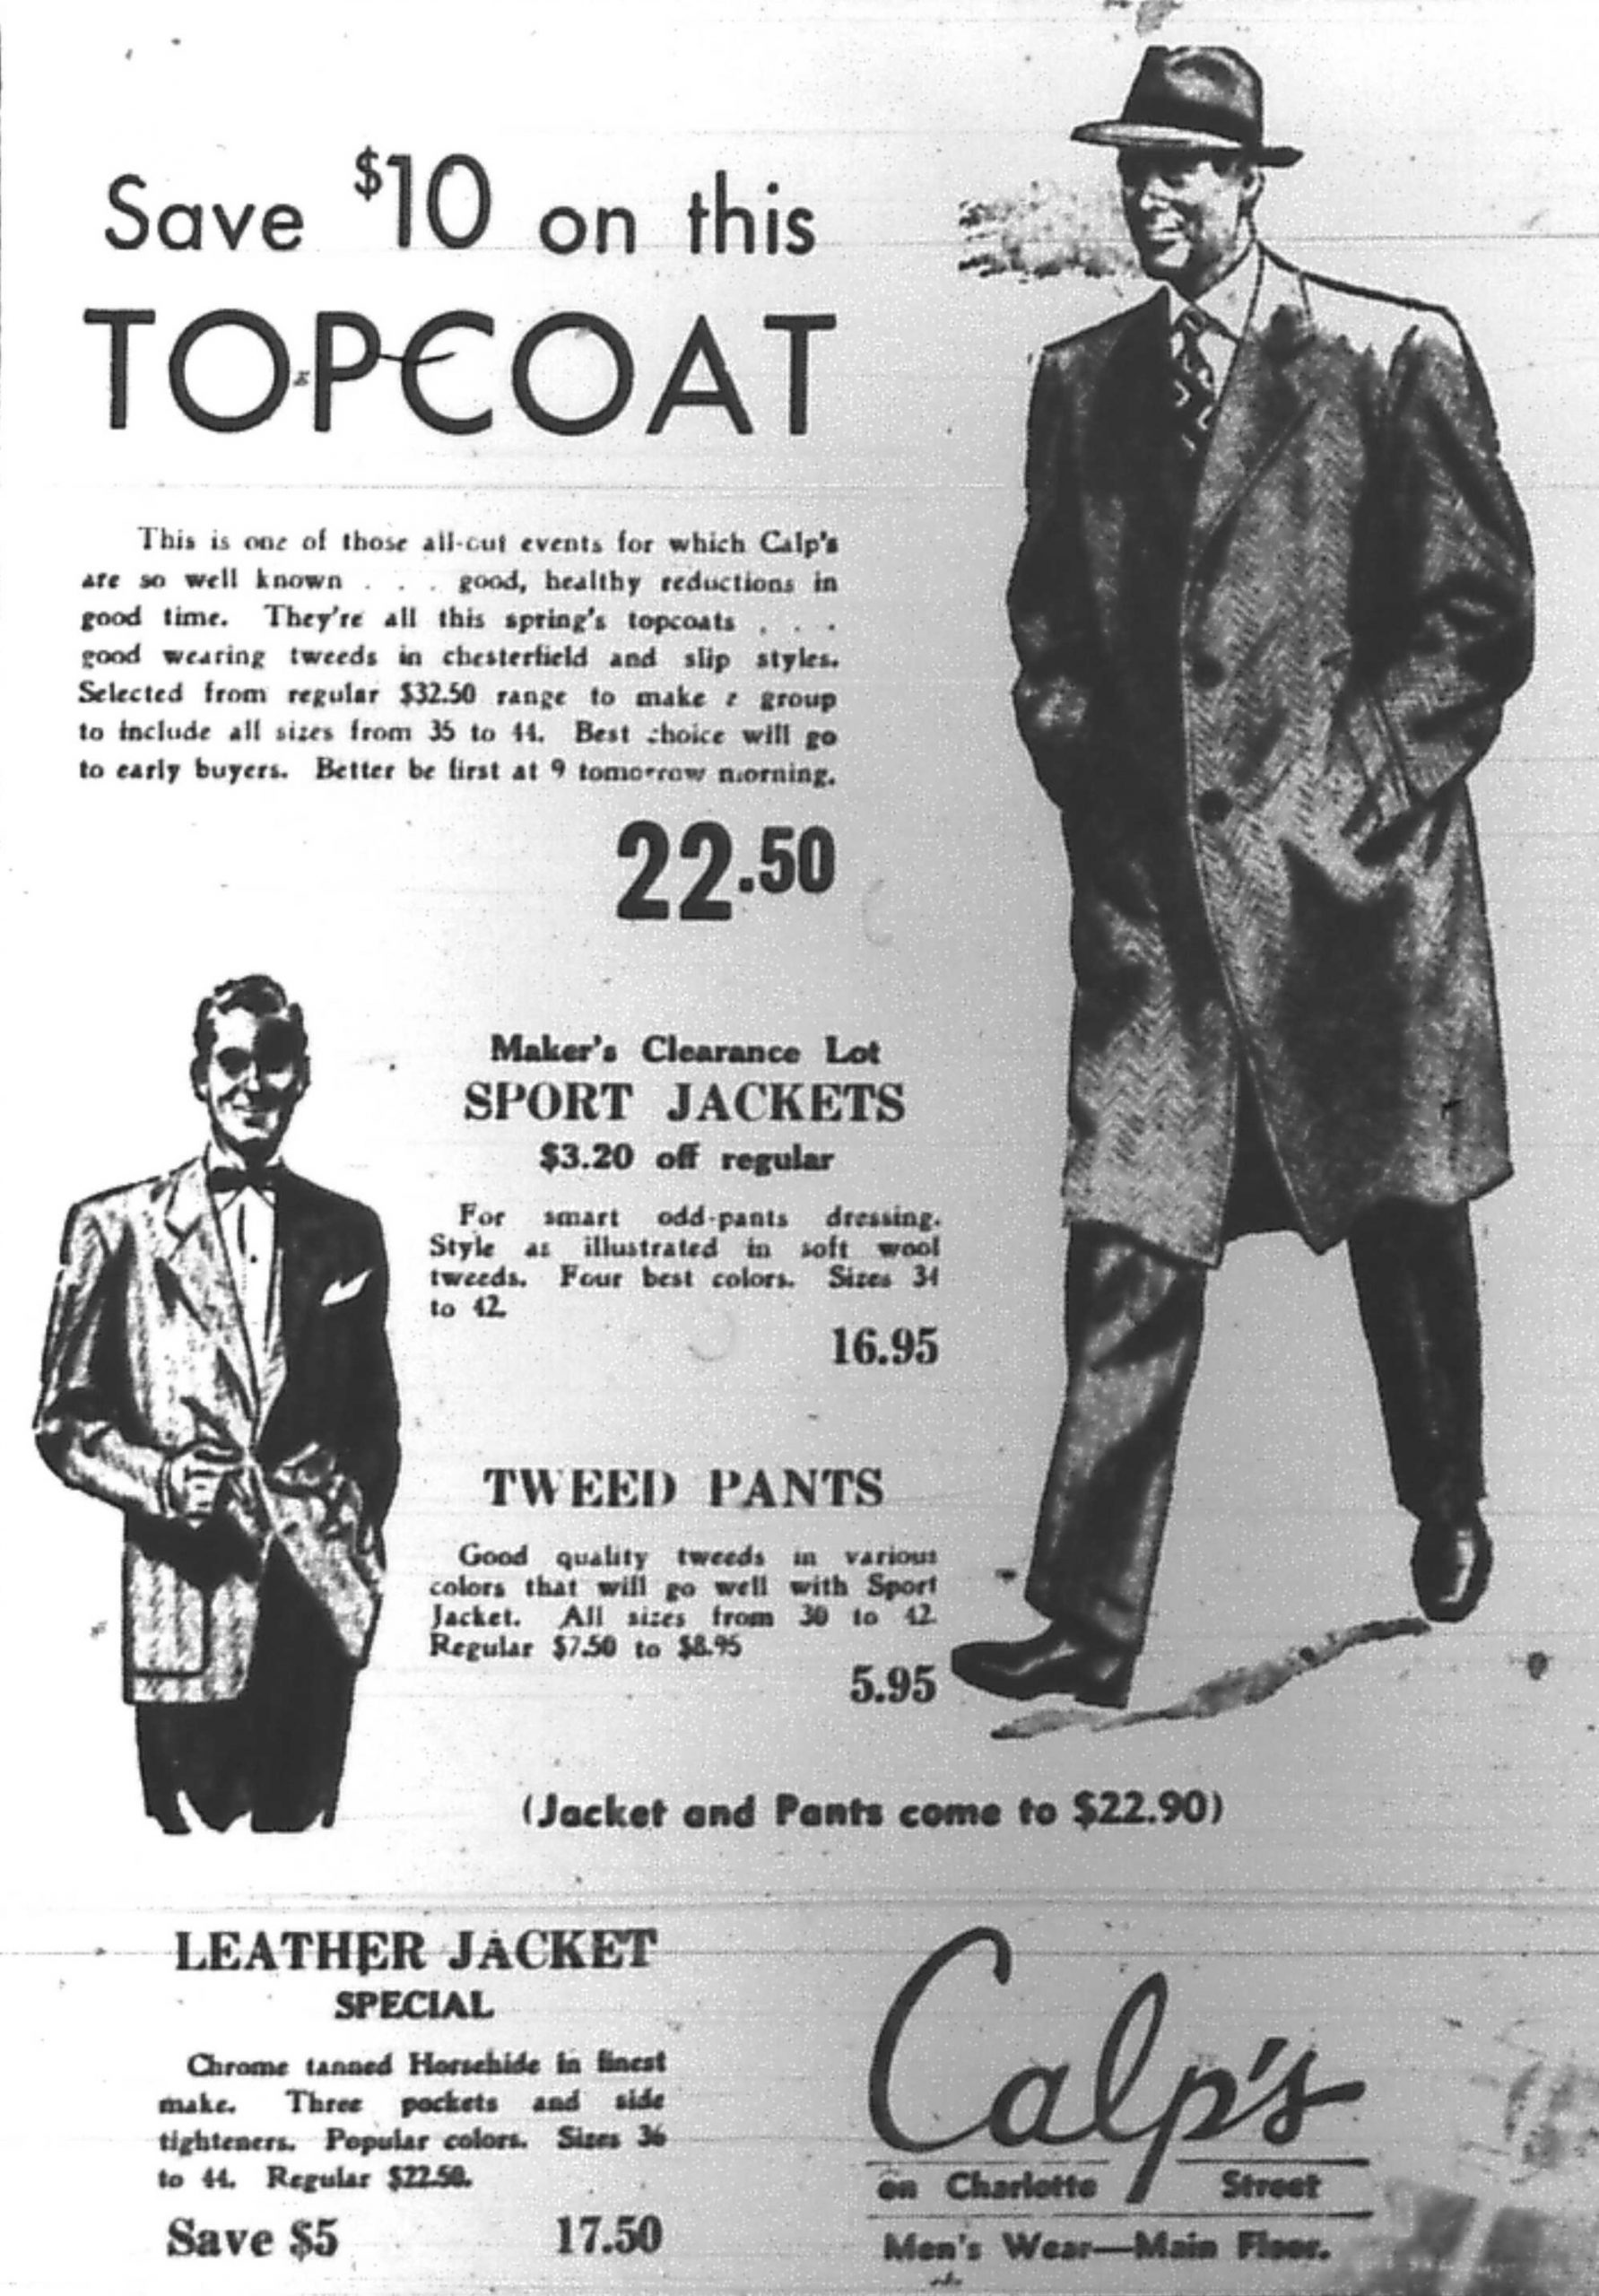 Newspaper advertisement –“Save $10 on this Topcoat” from Calp’s – accompanied by sketch of man in topcoat and hat.